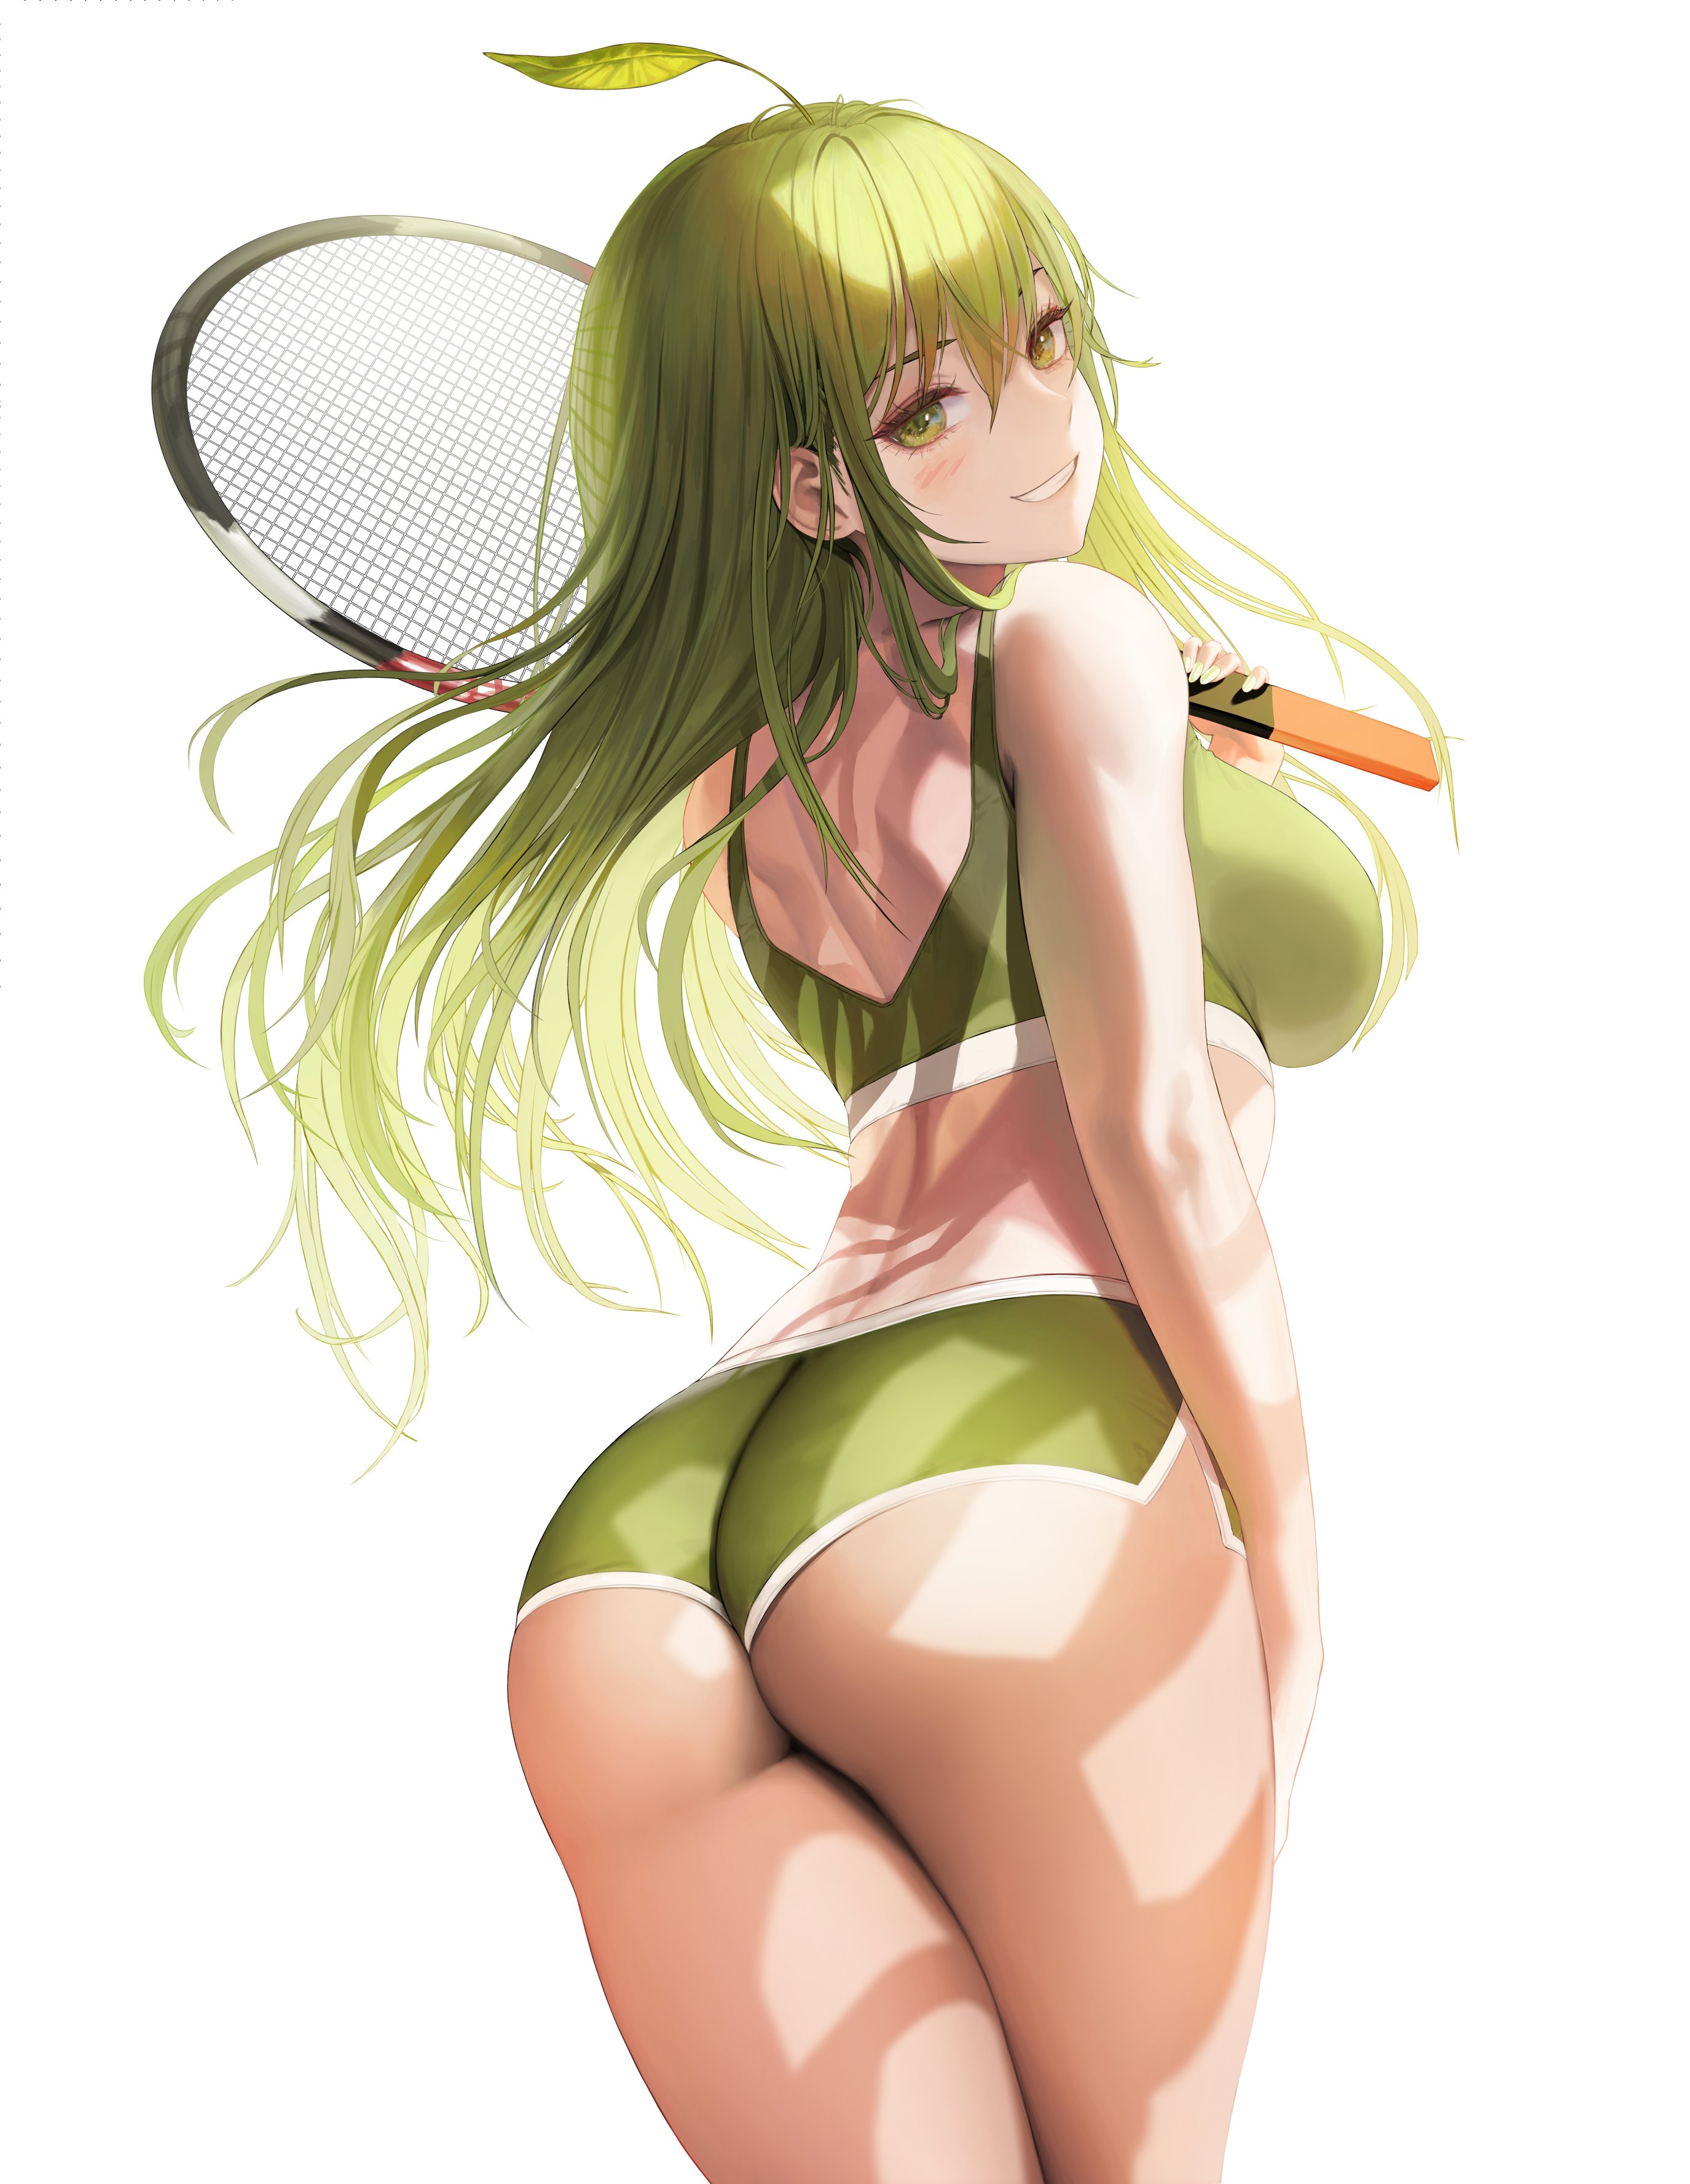 Anime 2750x3554 anime anime girls ass rear view tennis rackets boobs big boobs huge breasts curvy green hair long hair white background simple background smiling looking over shoulder short shorts sports bra green eyes sportswear artwork Tokkihouse